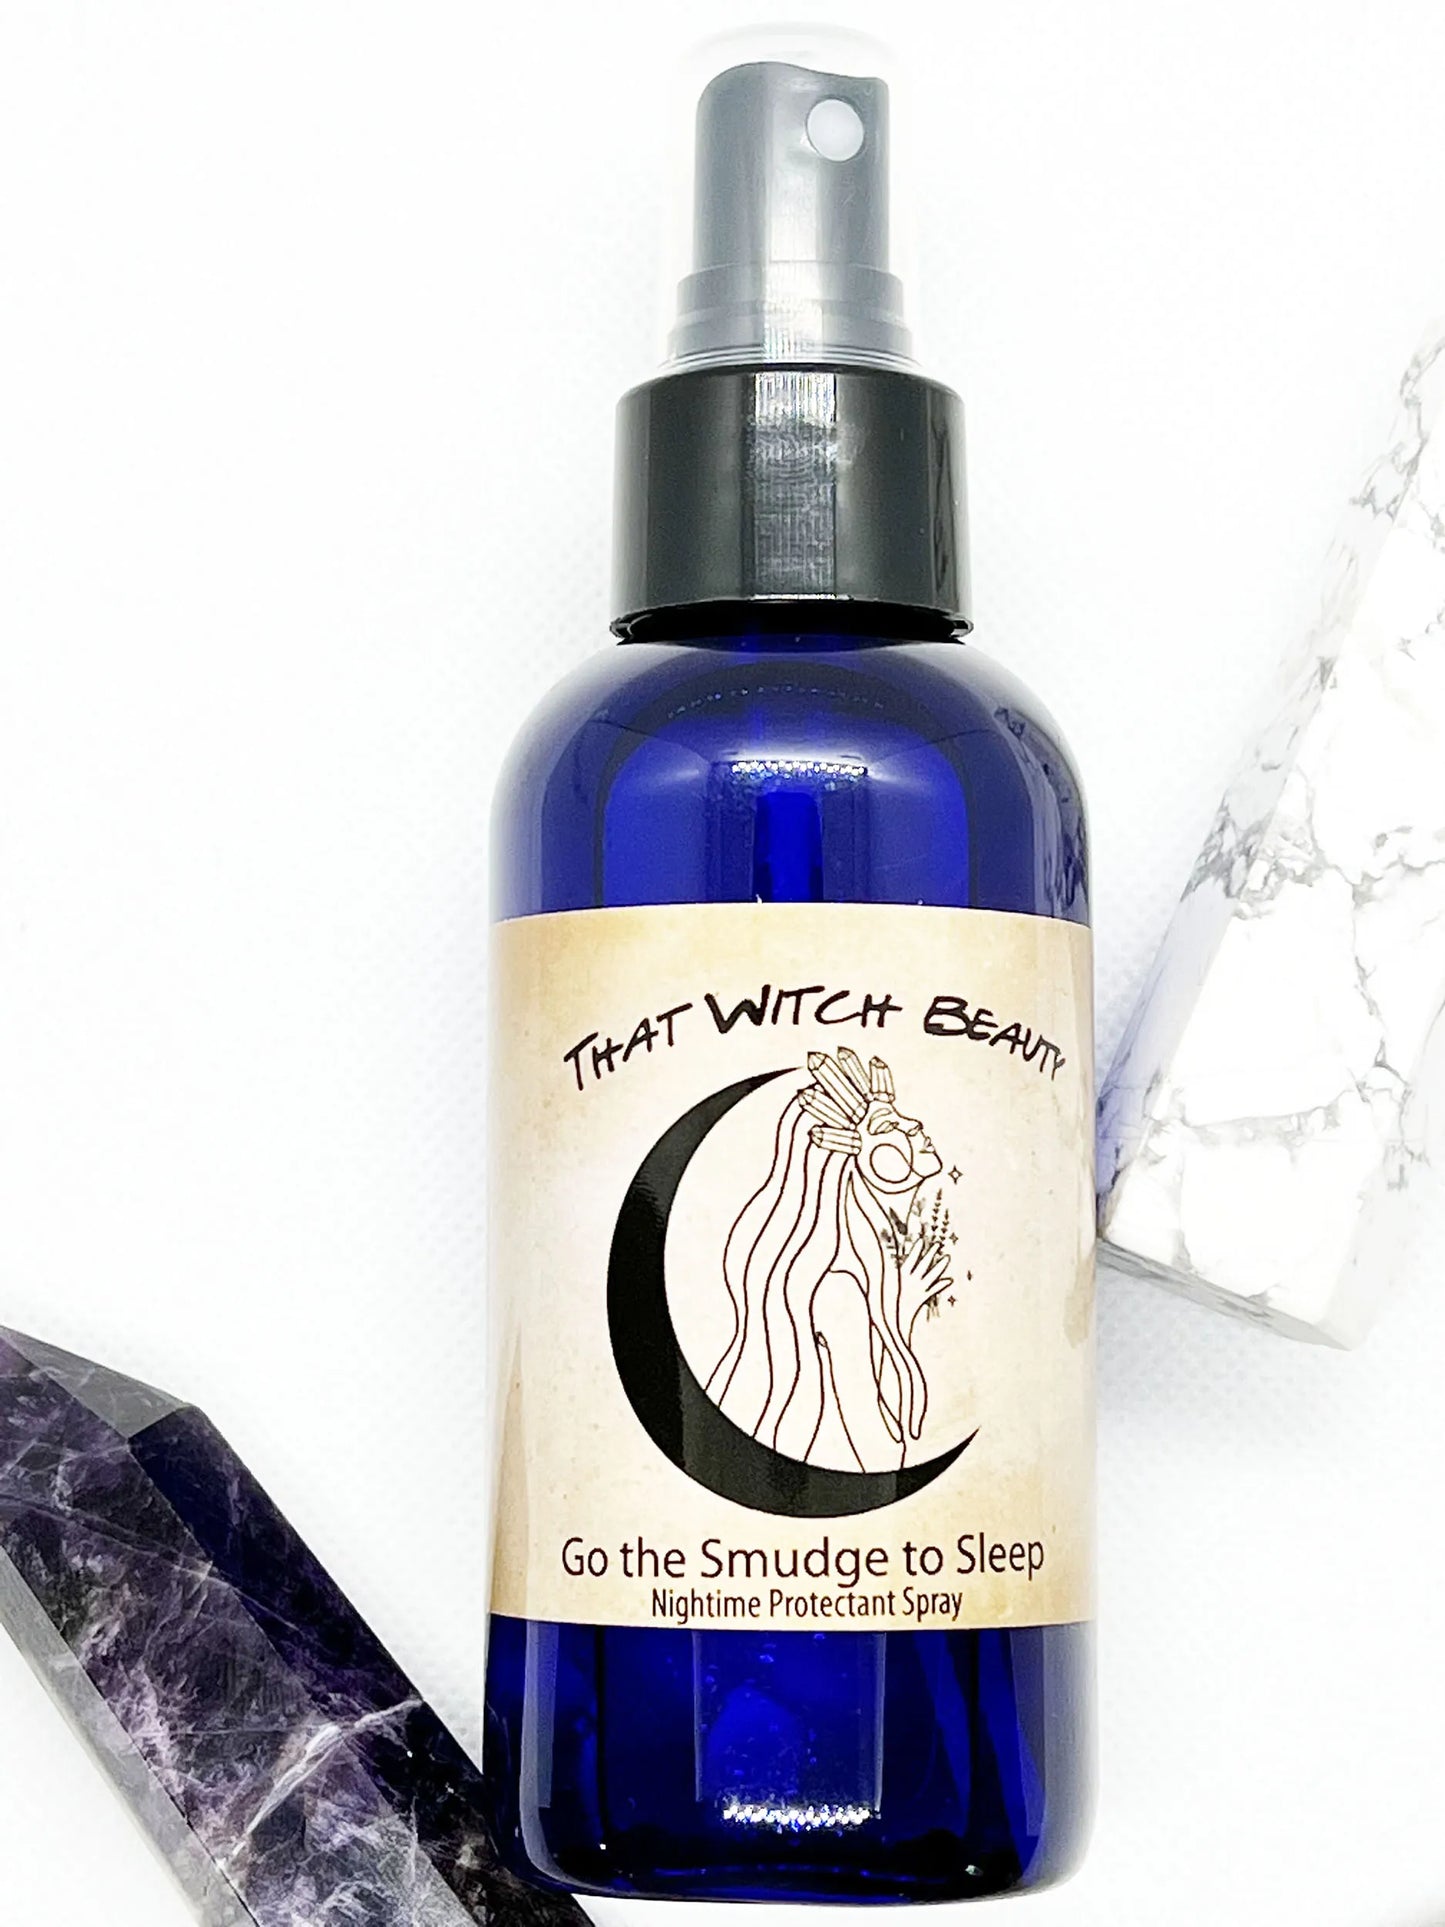 Go the Smudge to Sleep: Night Time Protectant Room and Linen Spray